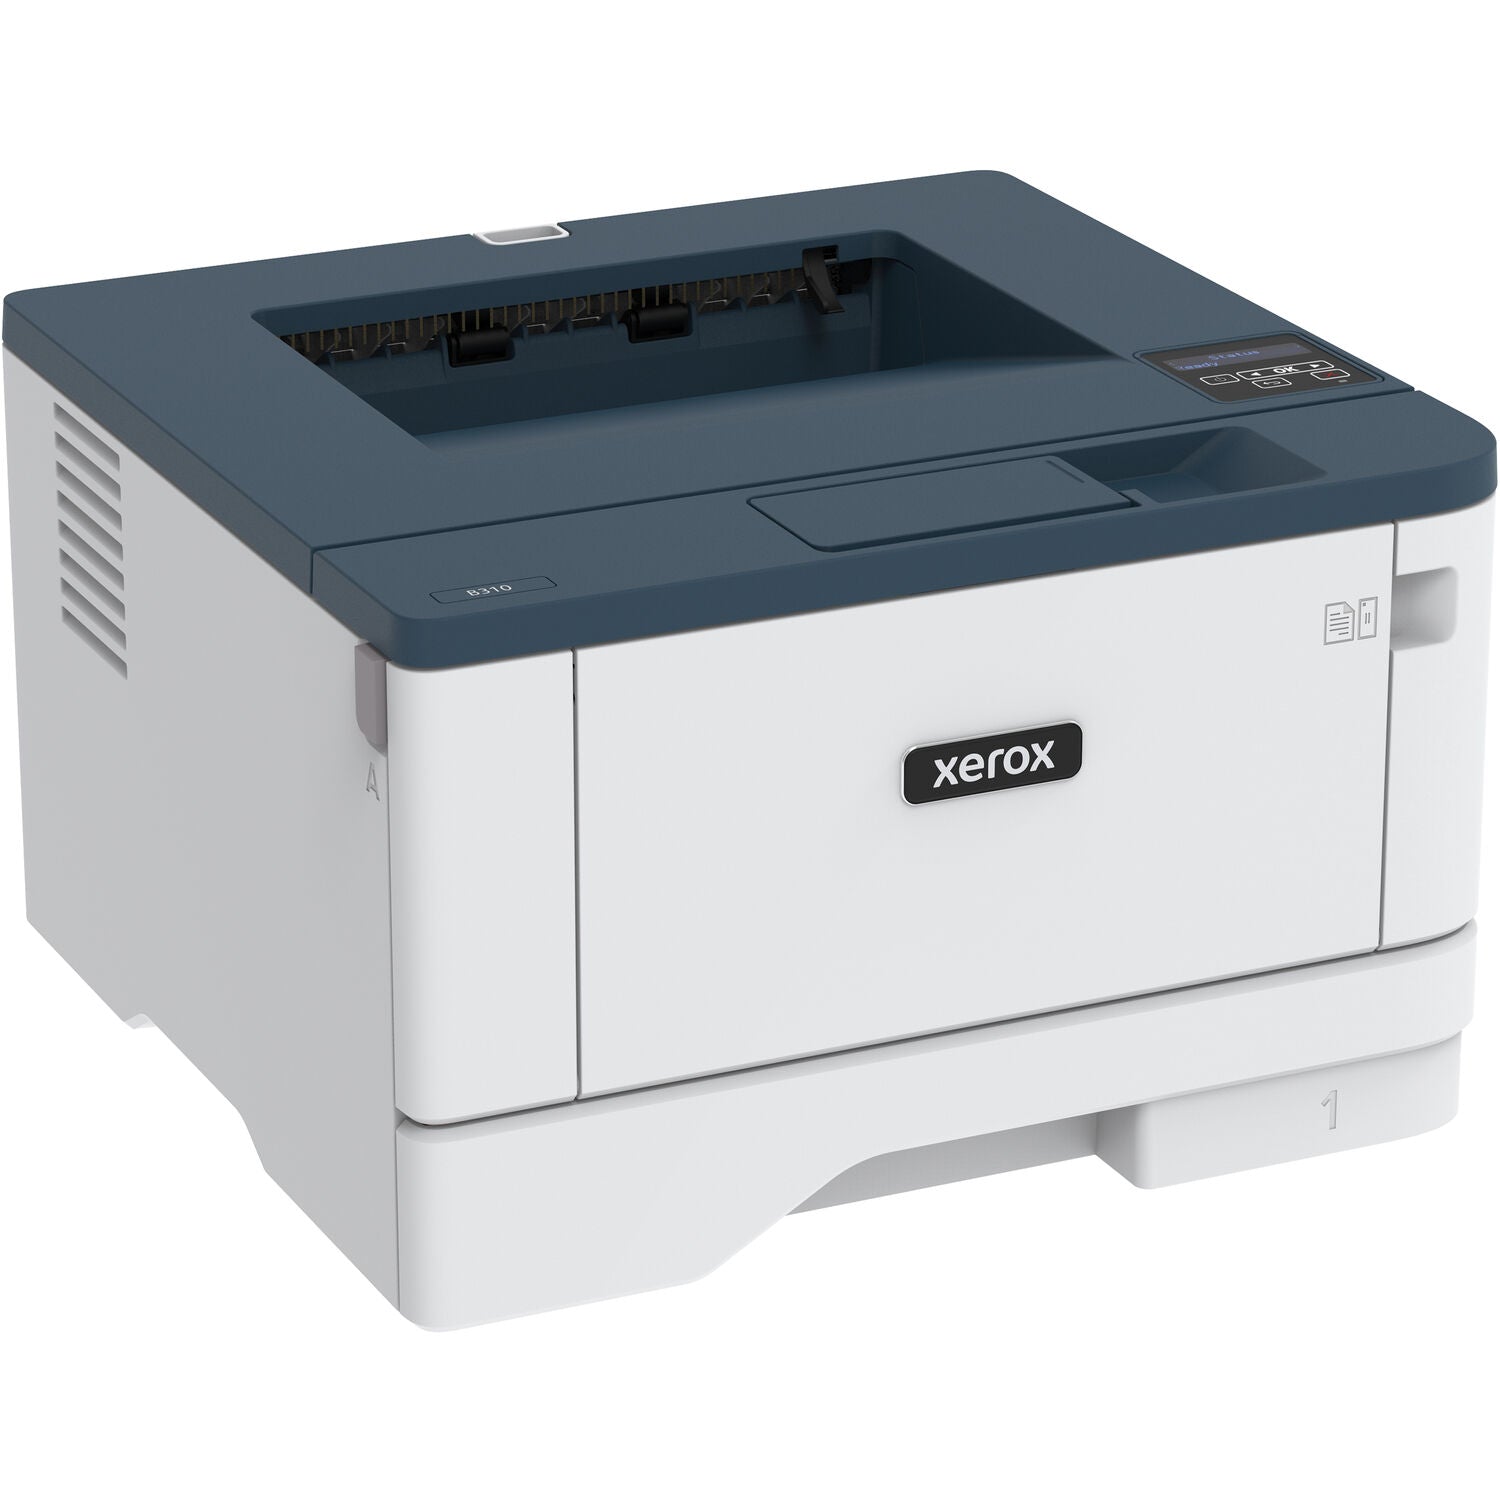 High-Speed Desktop Laser Printer With The Budget - Xerox B310/DNI Monochrome Laser Printer, Up To 42 PPM With Wireless Network Adapter And Automatic 2-Sided Printing  - Use For Home/Office